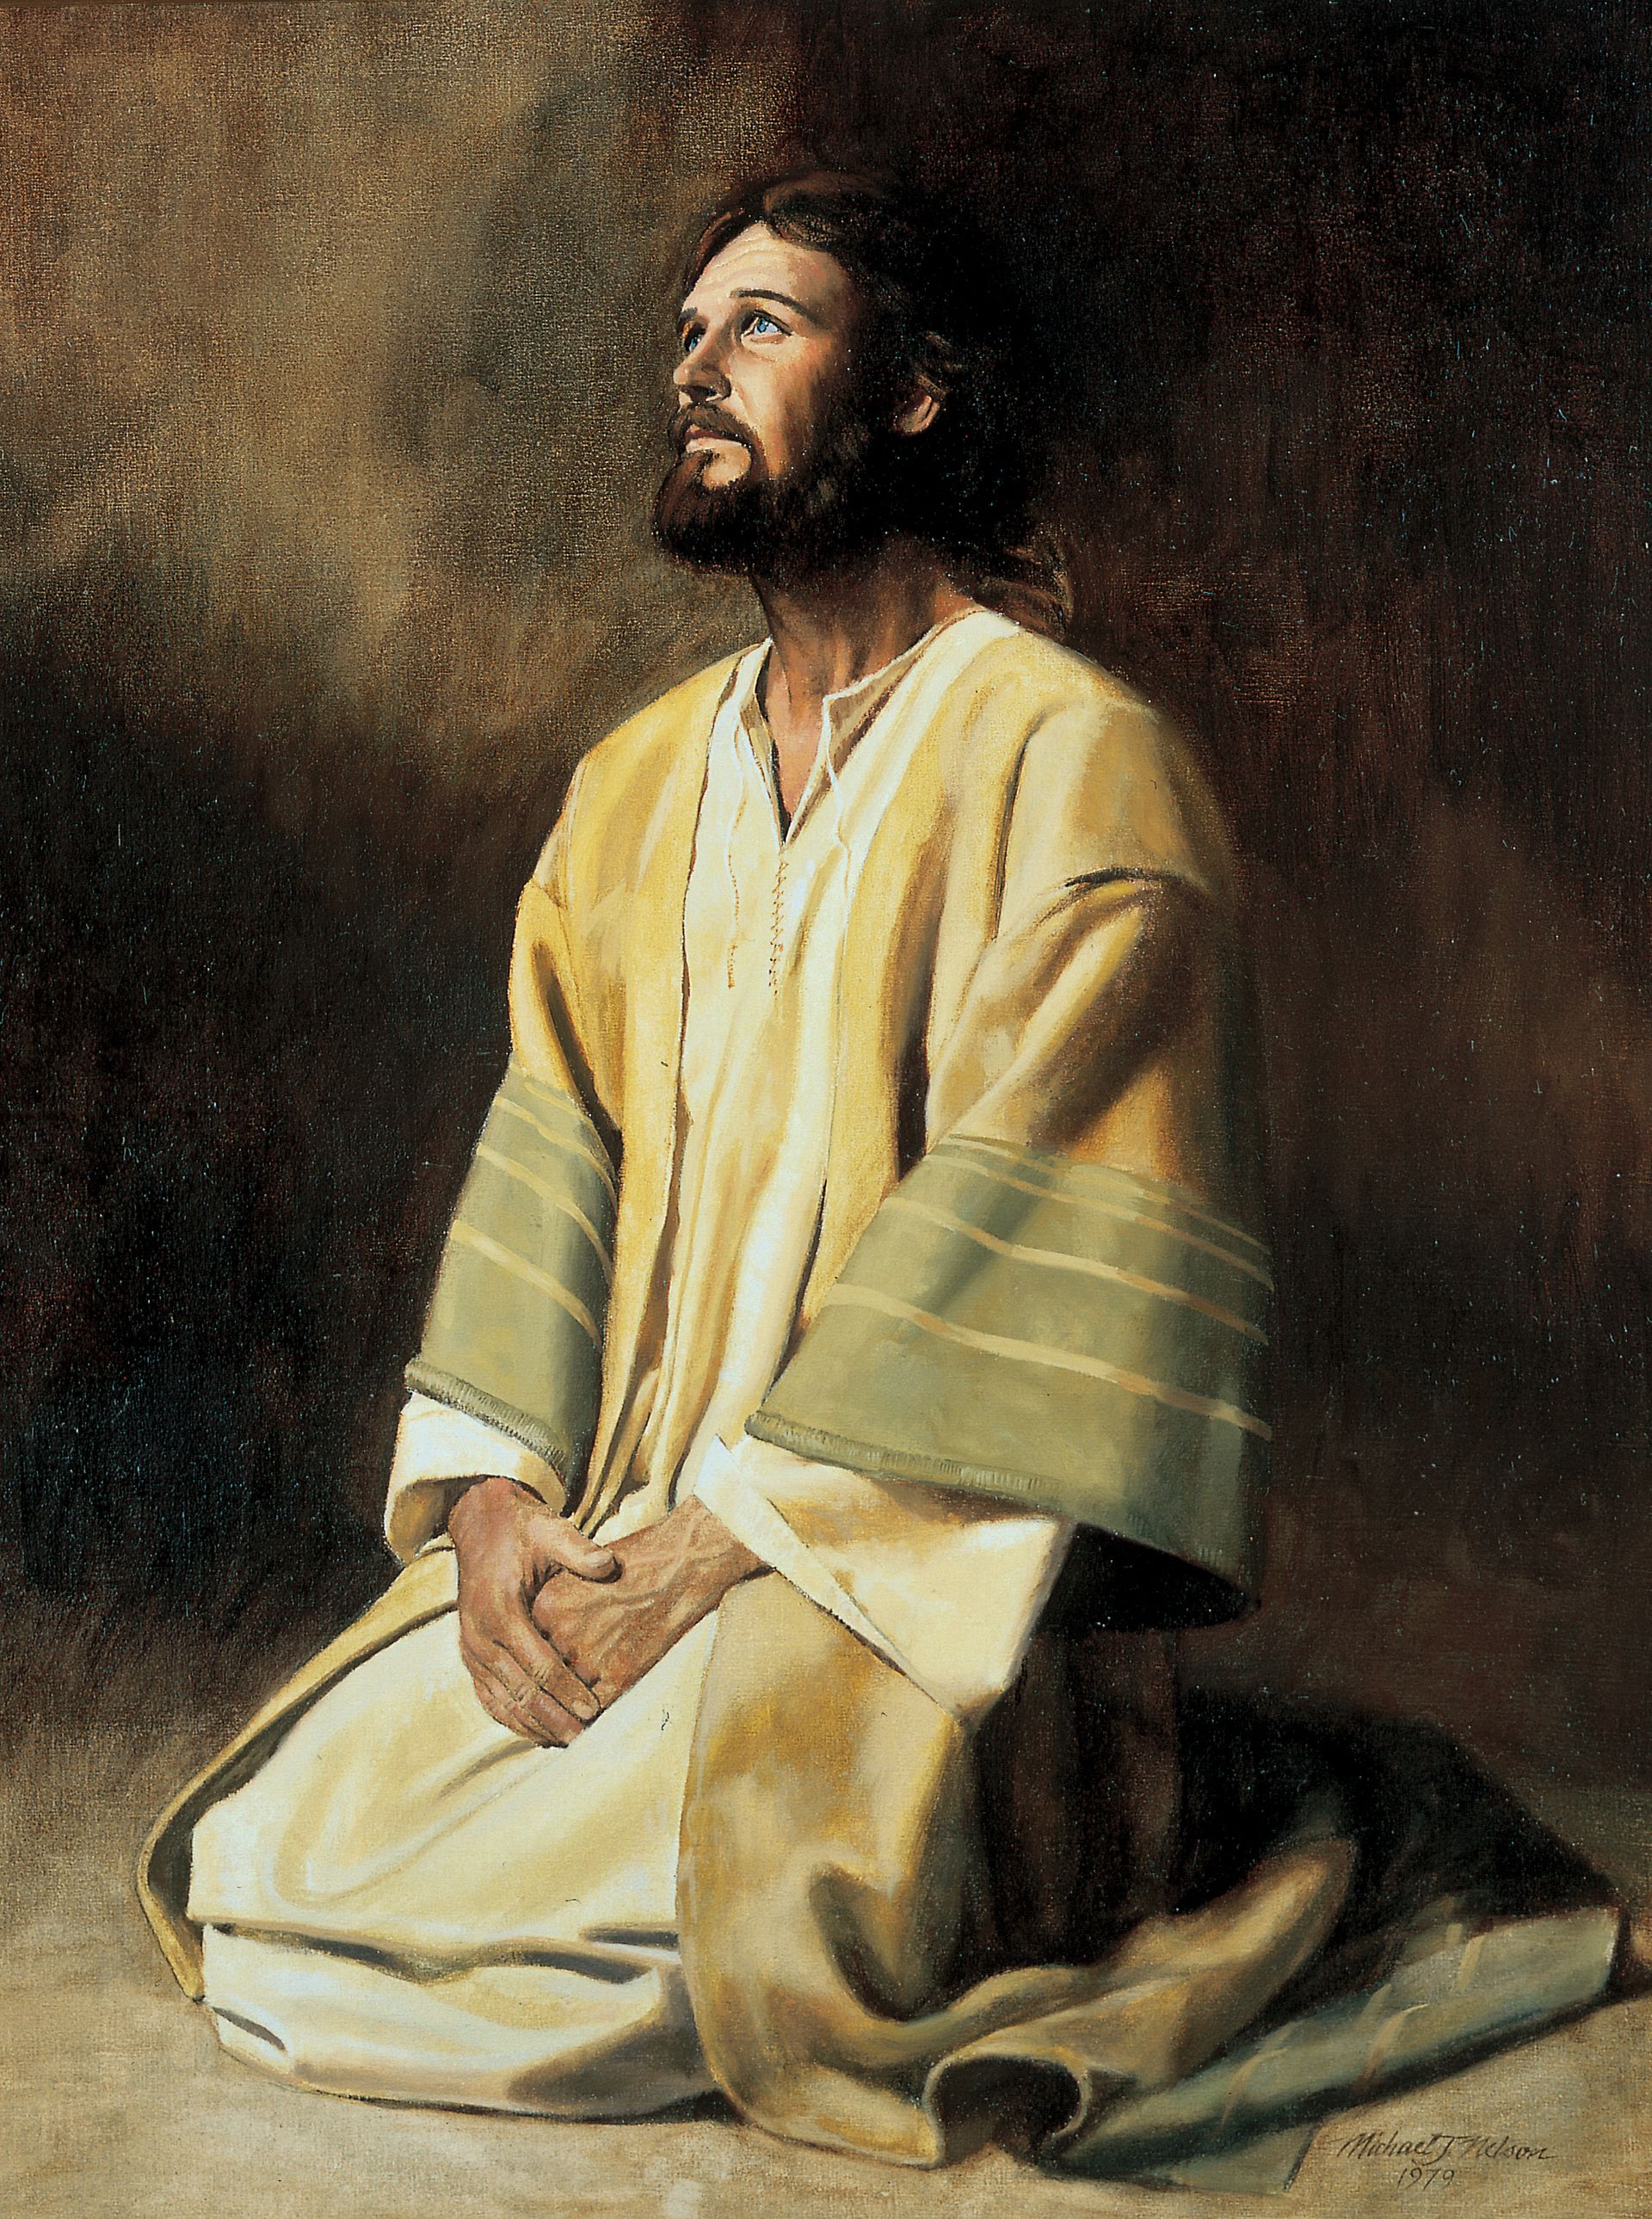 Jesus Kneeling in Prayer and Meditation, by Michael Jarvis Nelson